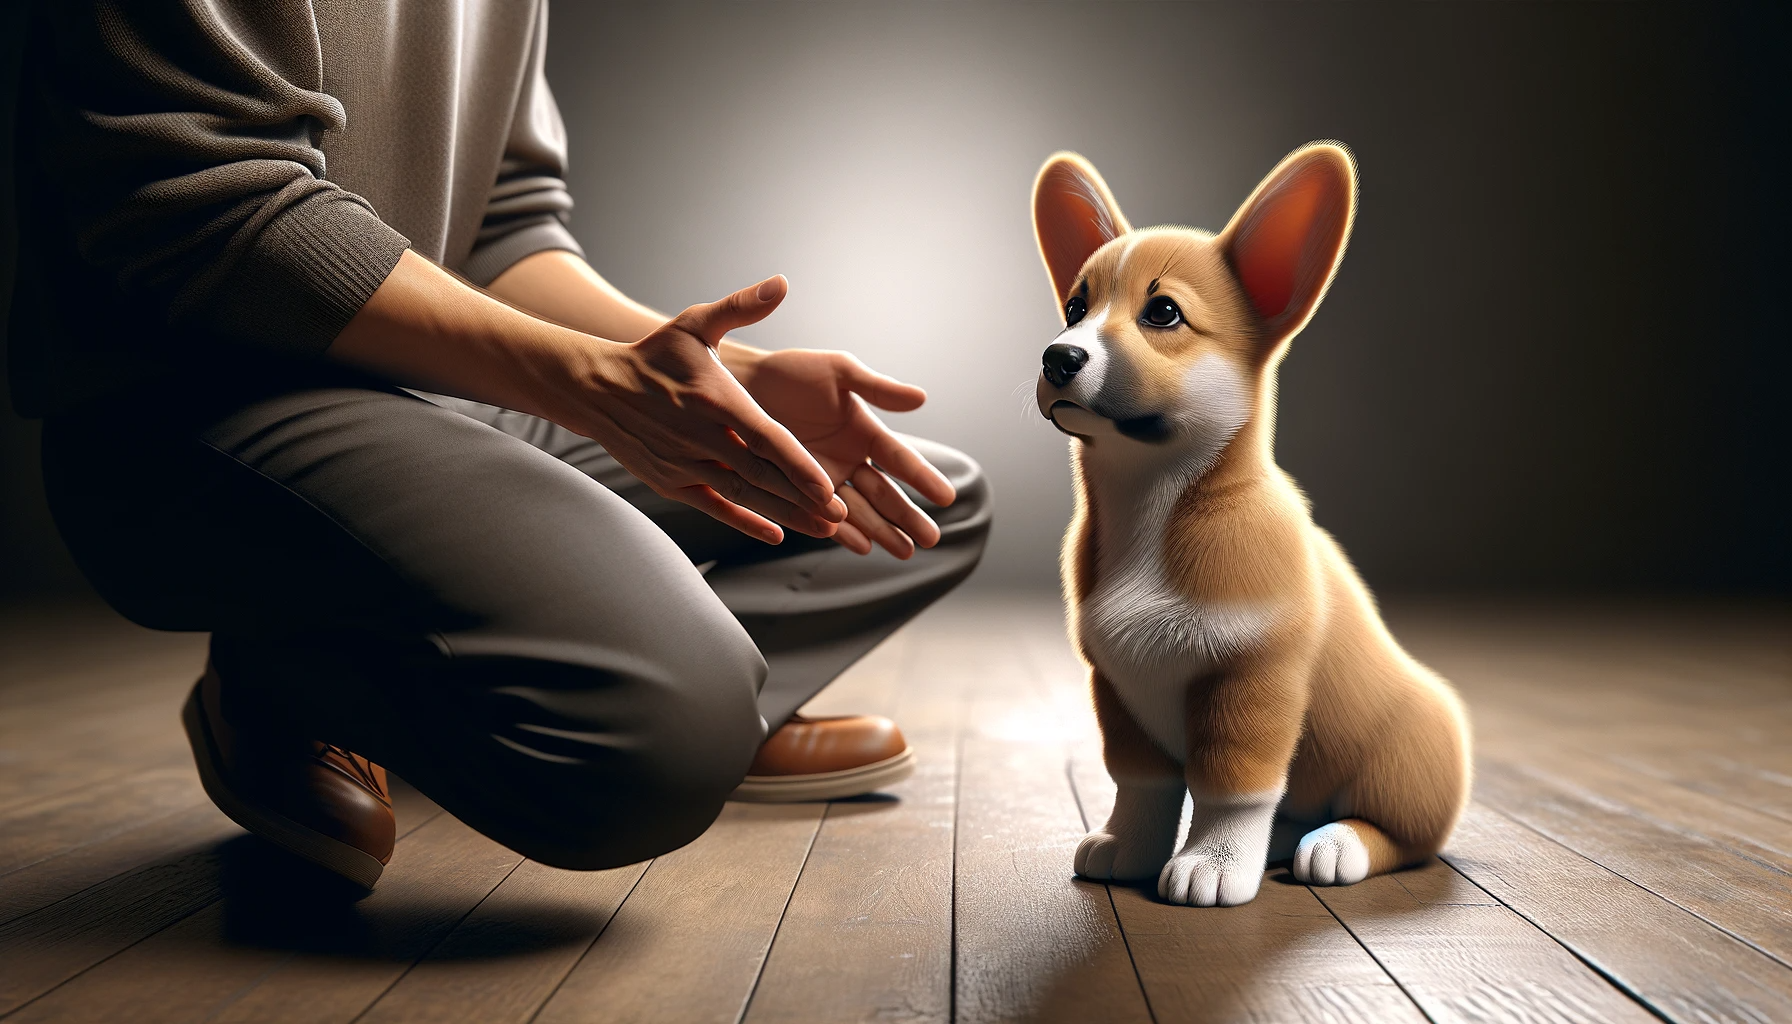 A Corgidor puppy sitting obediently during a training session